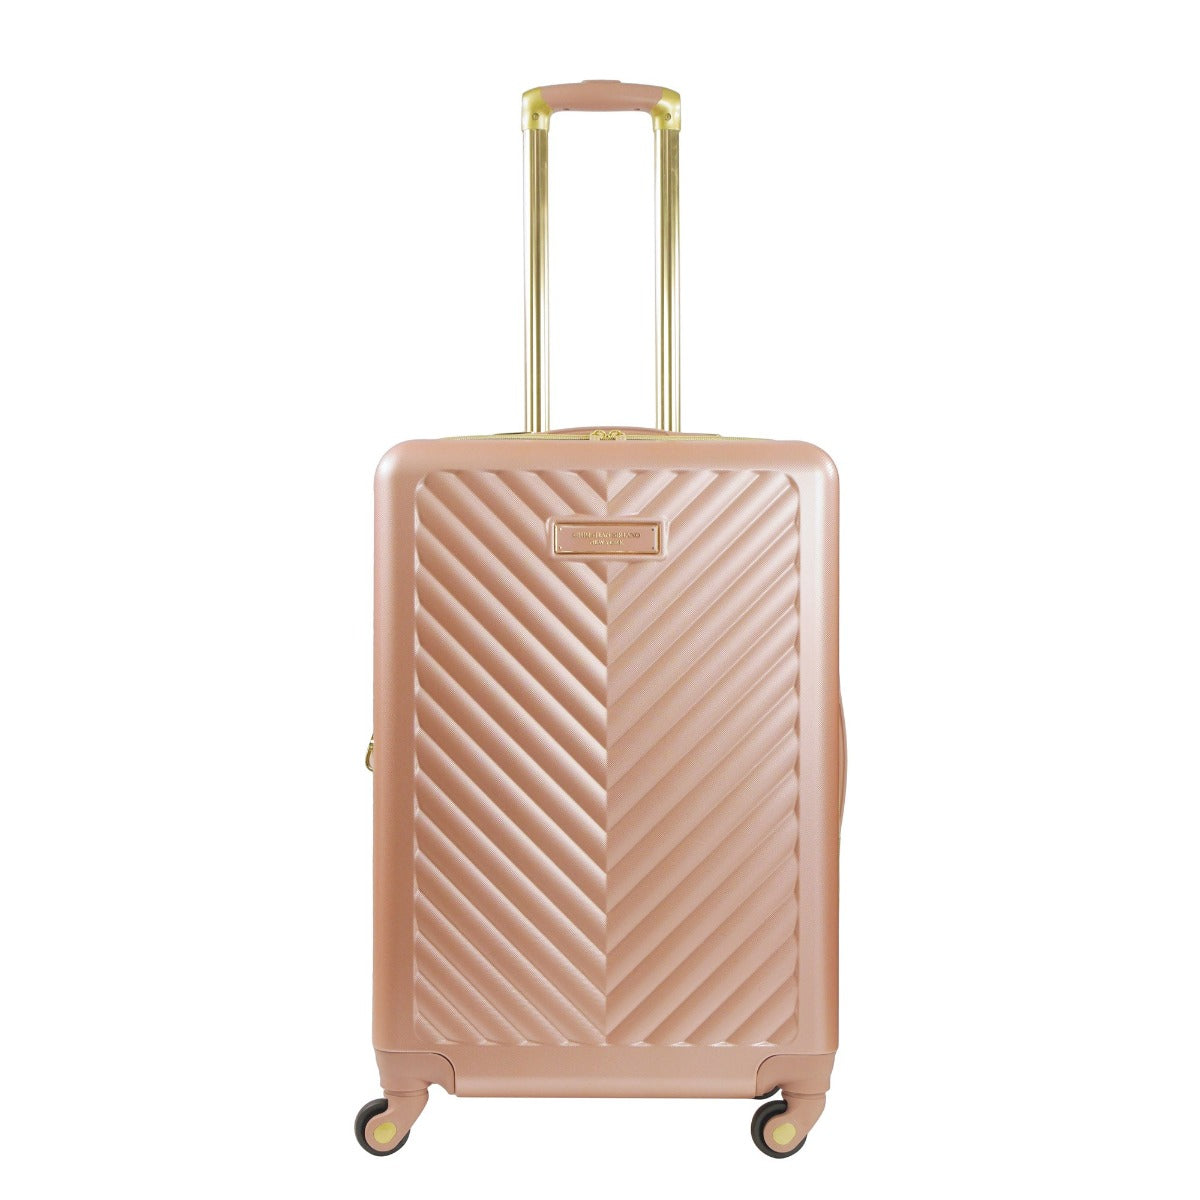 Christian Siriano Addie 25 inch luggage hardside spinner suitcase rose gold - best checked suitcases